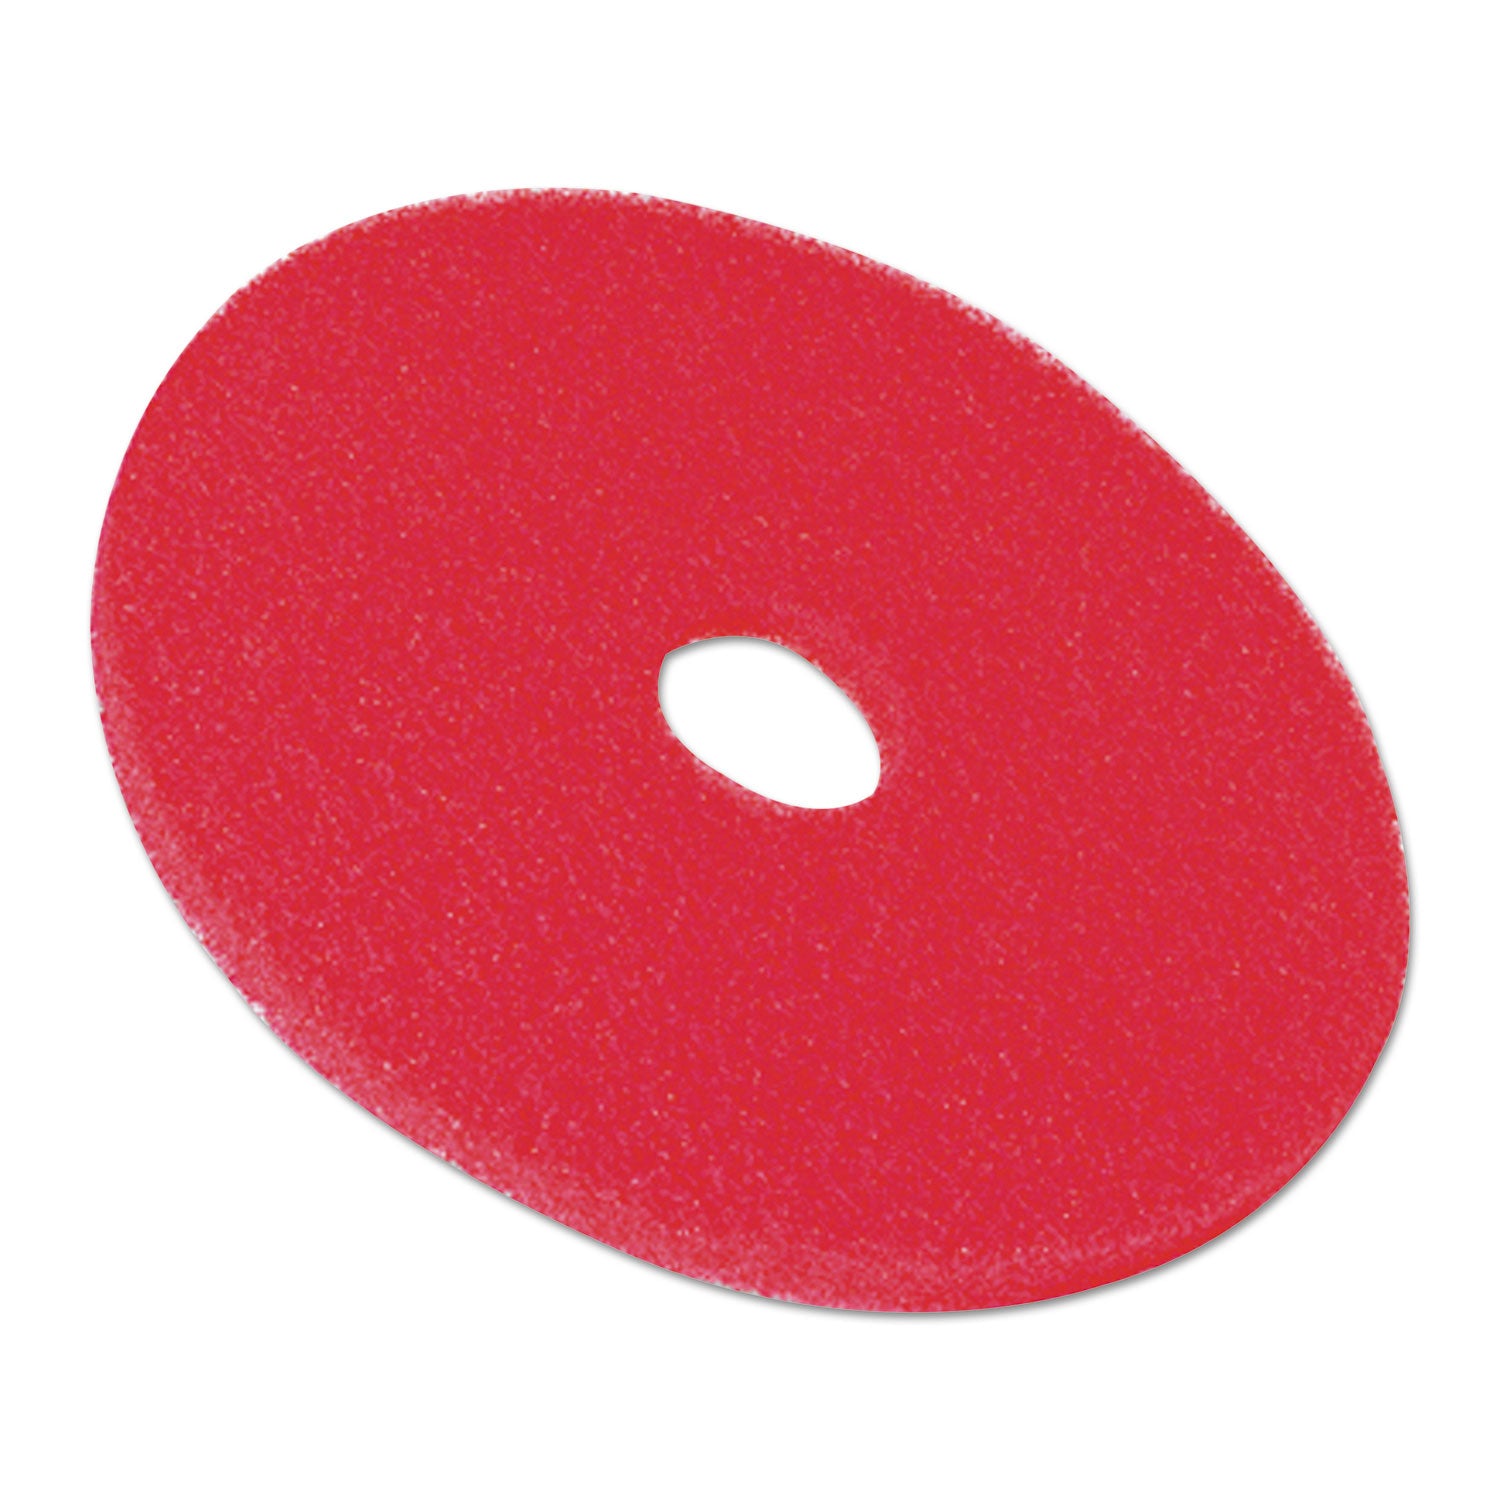 3M Red Buffer Pads - 5/Carton - Round x 17" Diameter - Buffing, Floor, Polishing, Cleaning - 175 rpm to 600 rpm Speed Supported - Textured, Adhesive, Durable, Scuff Mark Remover, Abrasive - Polyester Fiber - Red - 2